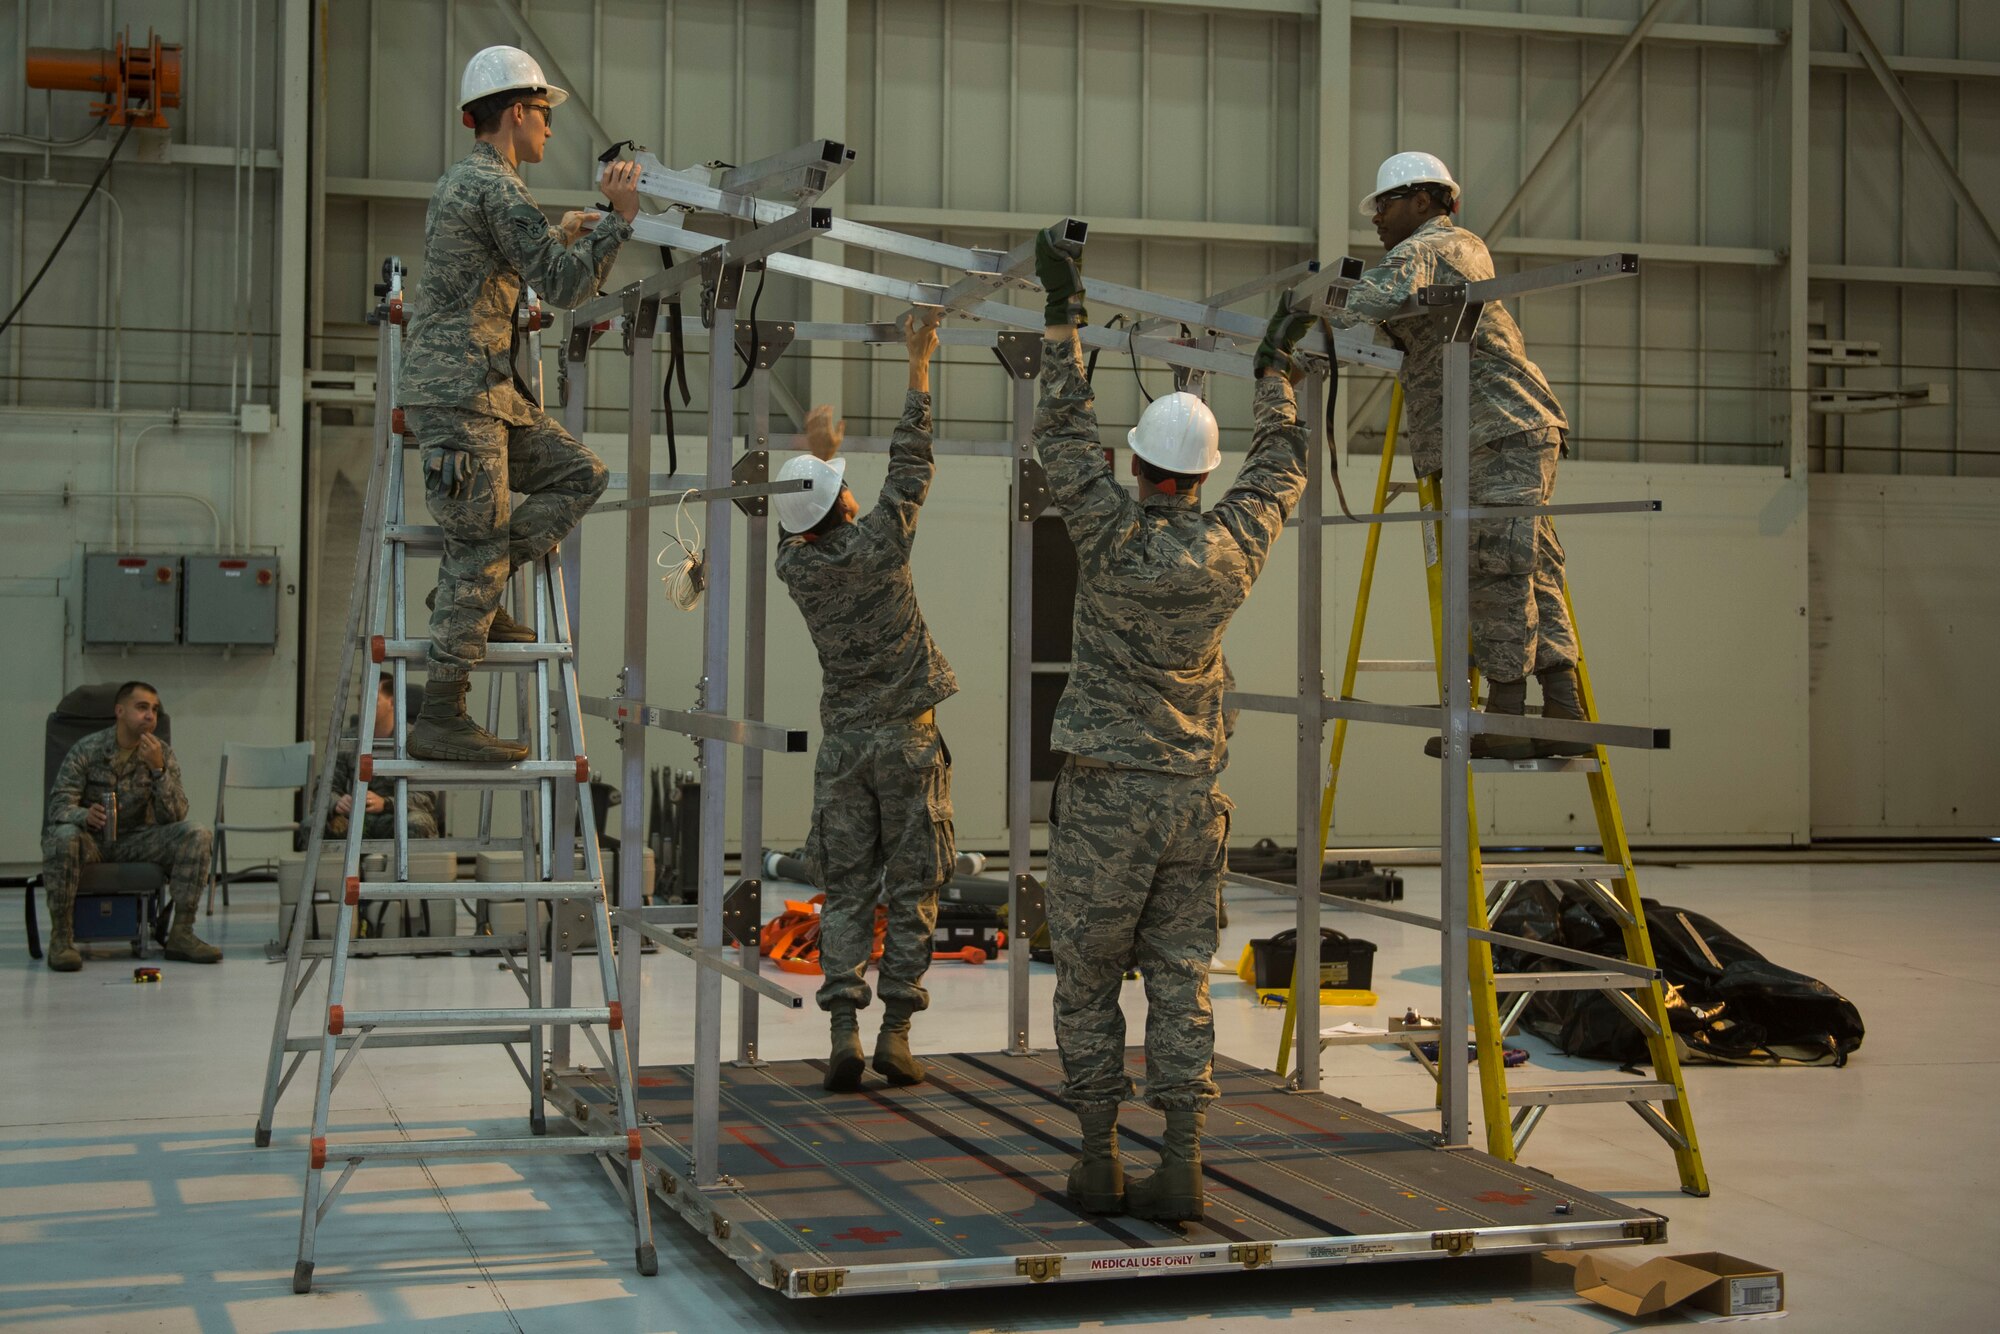 Airmen from Joint Base Charleston and the Air Force Operational Test and Evaluation Center build, test, and evaluate the Transport Isolation System (TIS) at JB Charleston, Dec. 4,2014. The TIS is a self-contained module system that can be used with either two or three sections, depending on aircraft space. It will be used to safely transport patients with an infectious disease.(U.S. Air Force photo by Airman 1st Class Taylor Queen/Released)